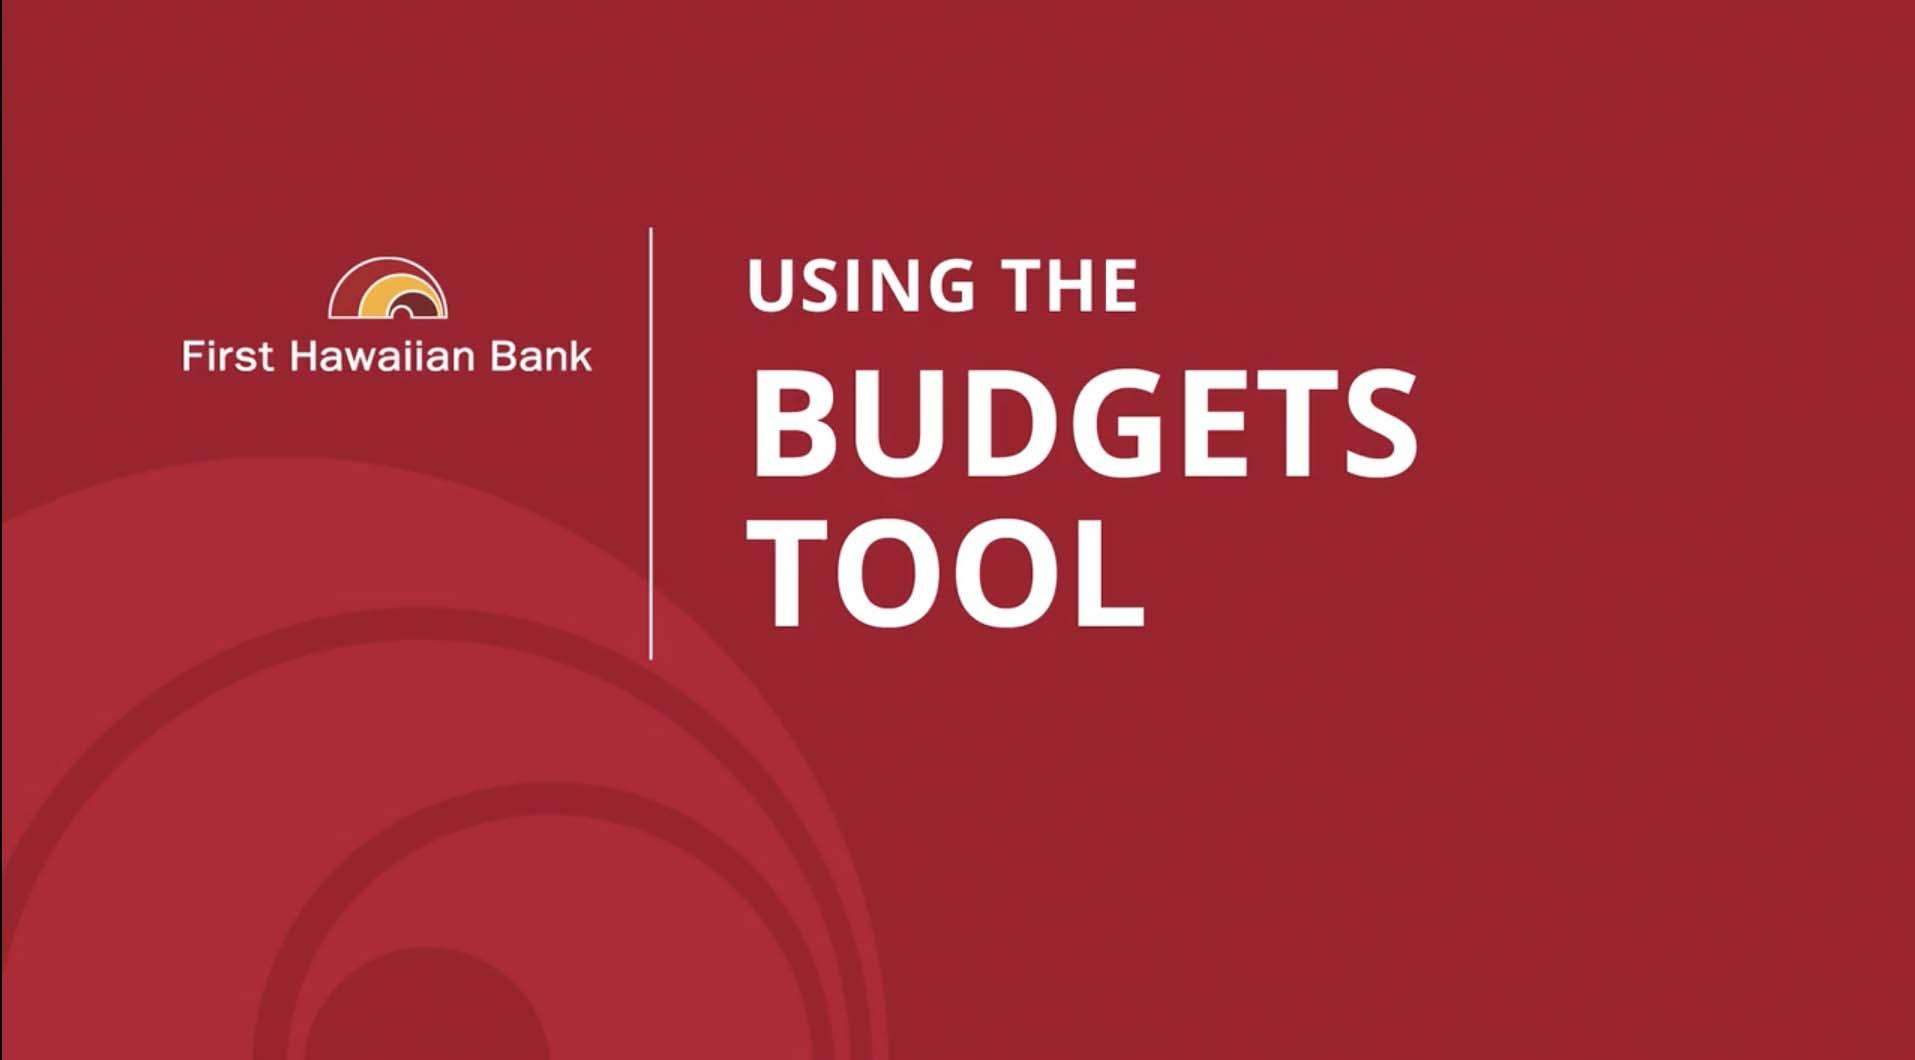 Using the Budgets Tool